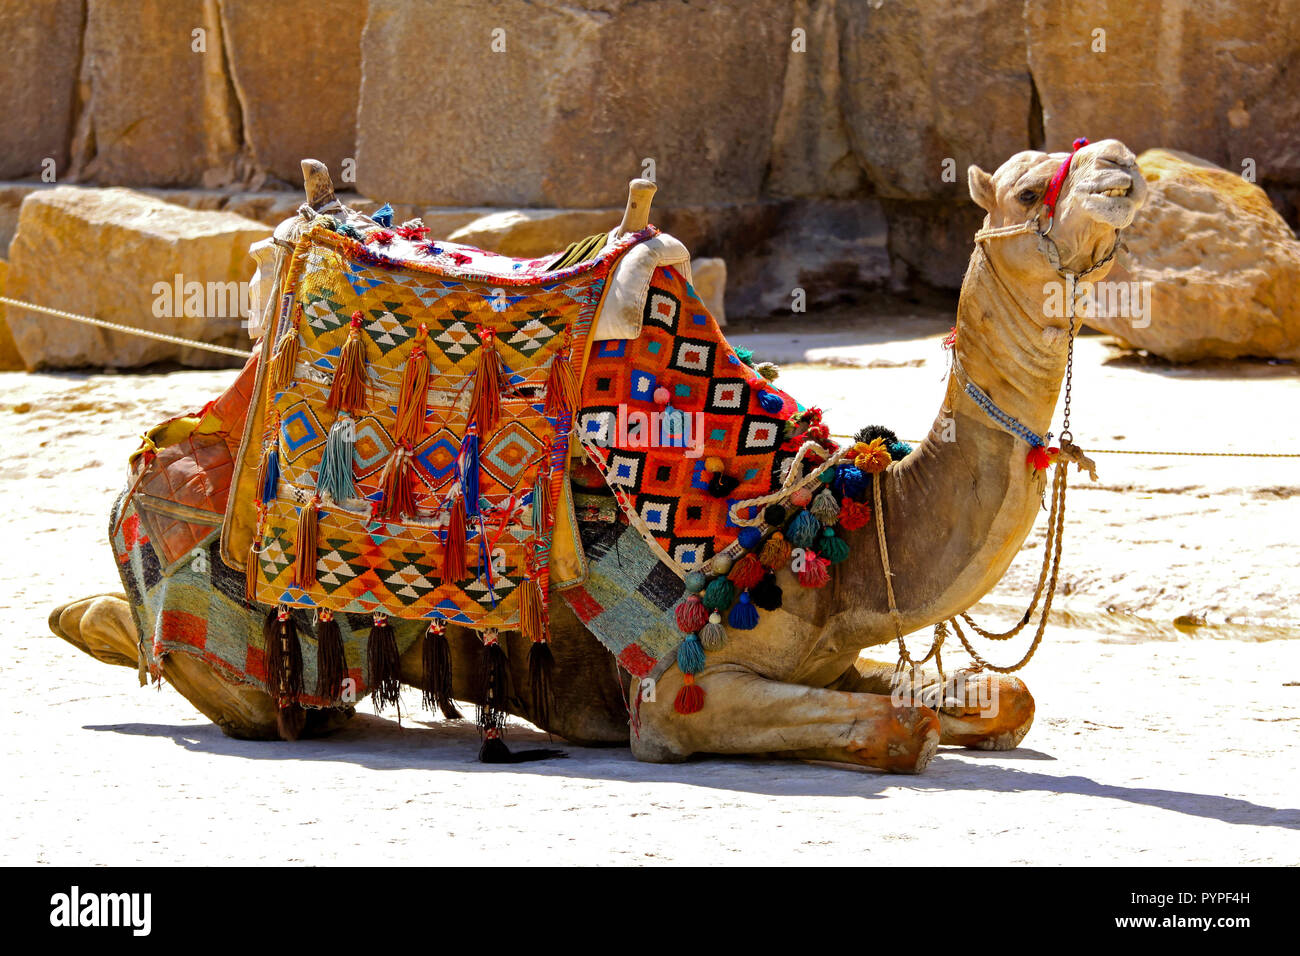 Camel sit with traditional Bedouin saddle in Egypt Stock Photo